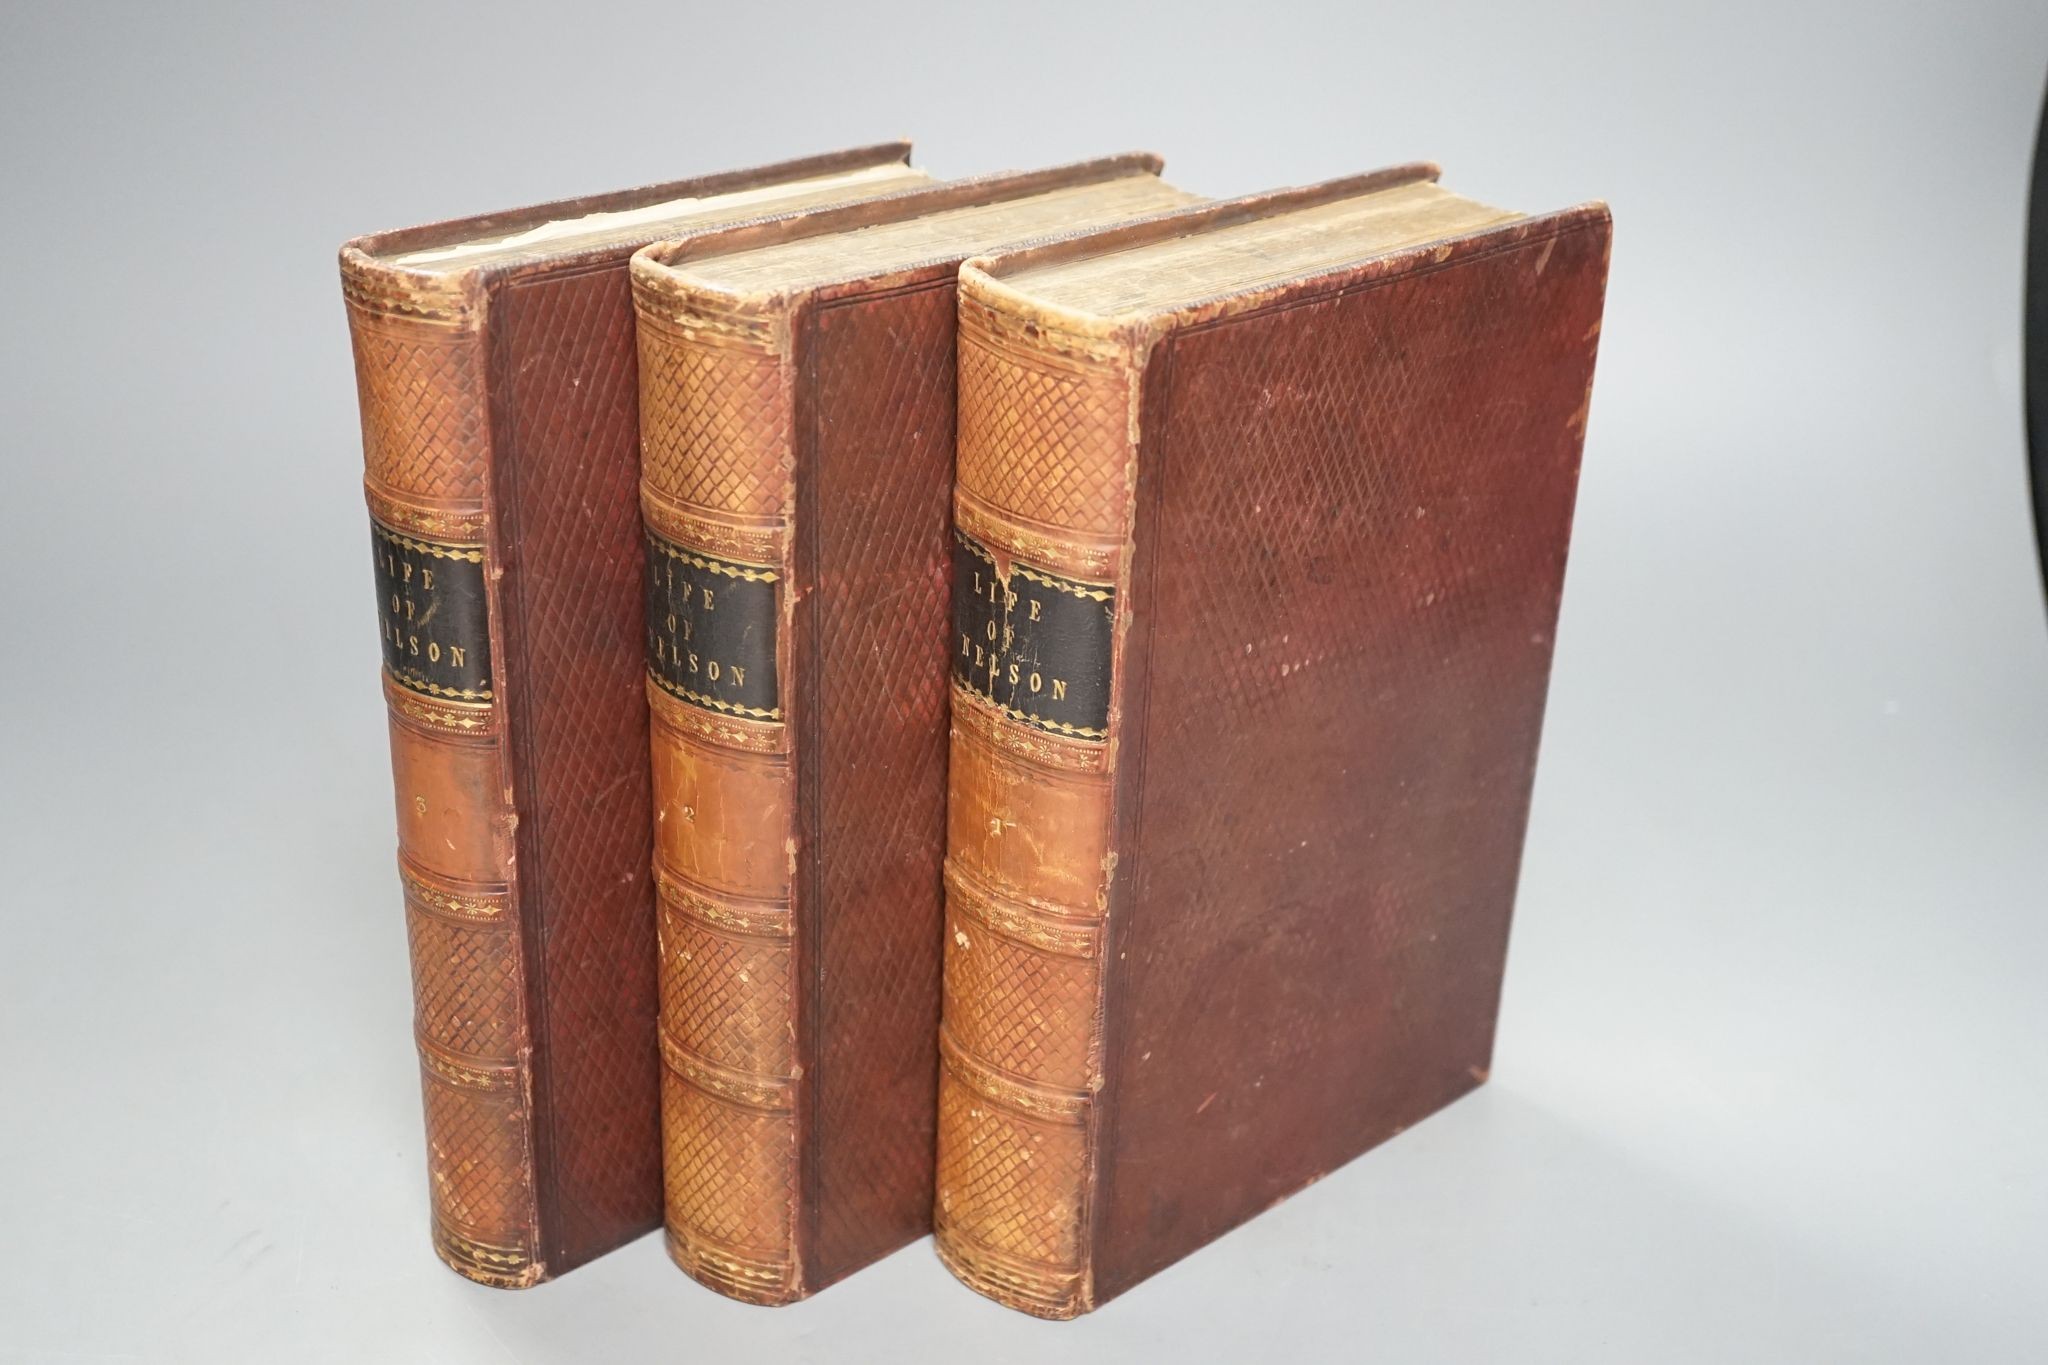 Clarke, Rev. James Stainer and M'Arthur, John - The Life and Services of Horatio Viscount Nelson ... (new edition), 3 vols, engraved pictorial and printed titles, 35 plates (but lacks Boulogne plan); contemp. diced calf,